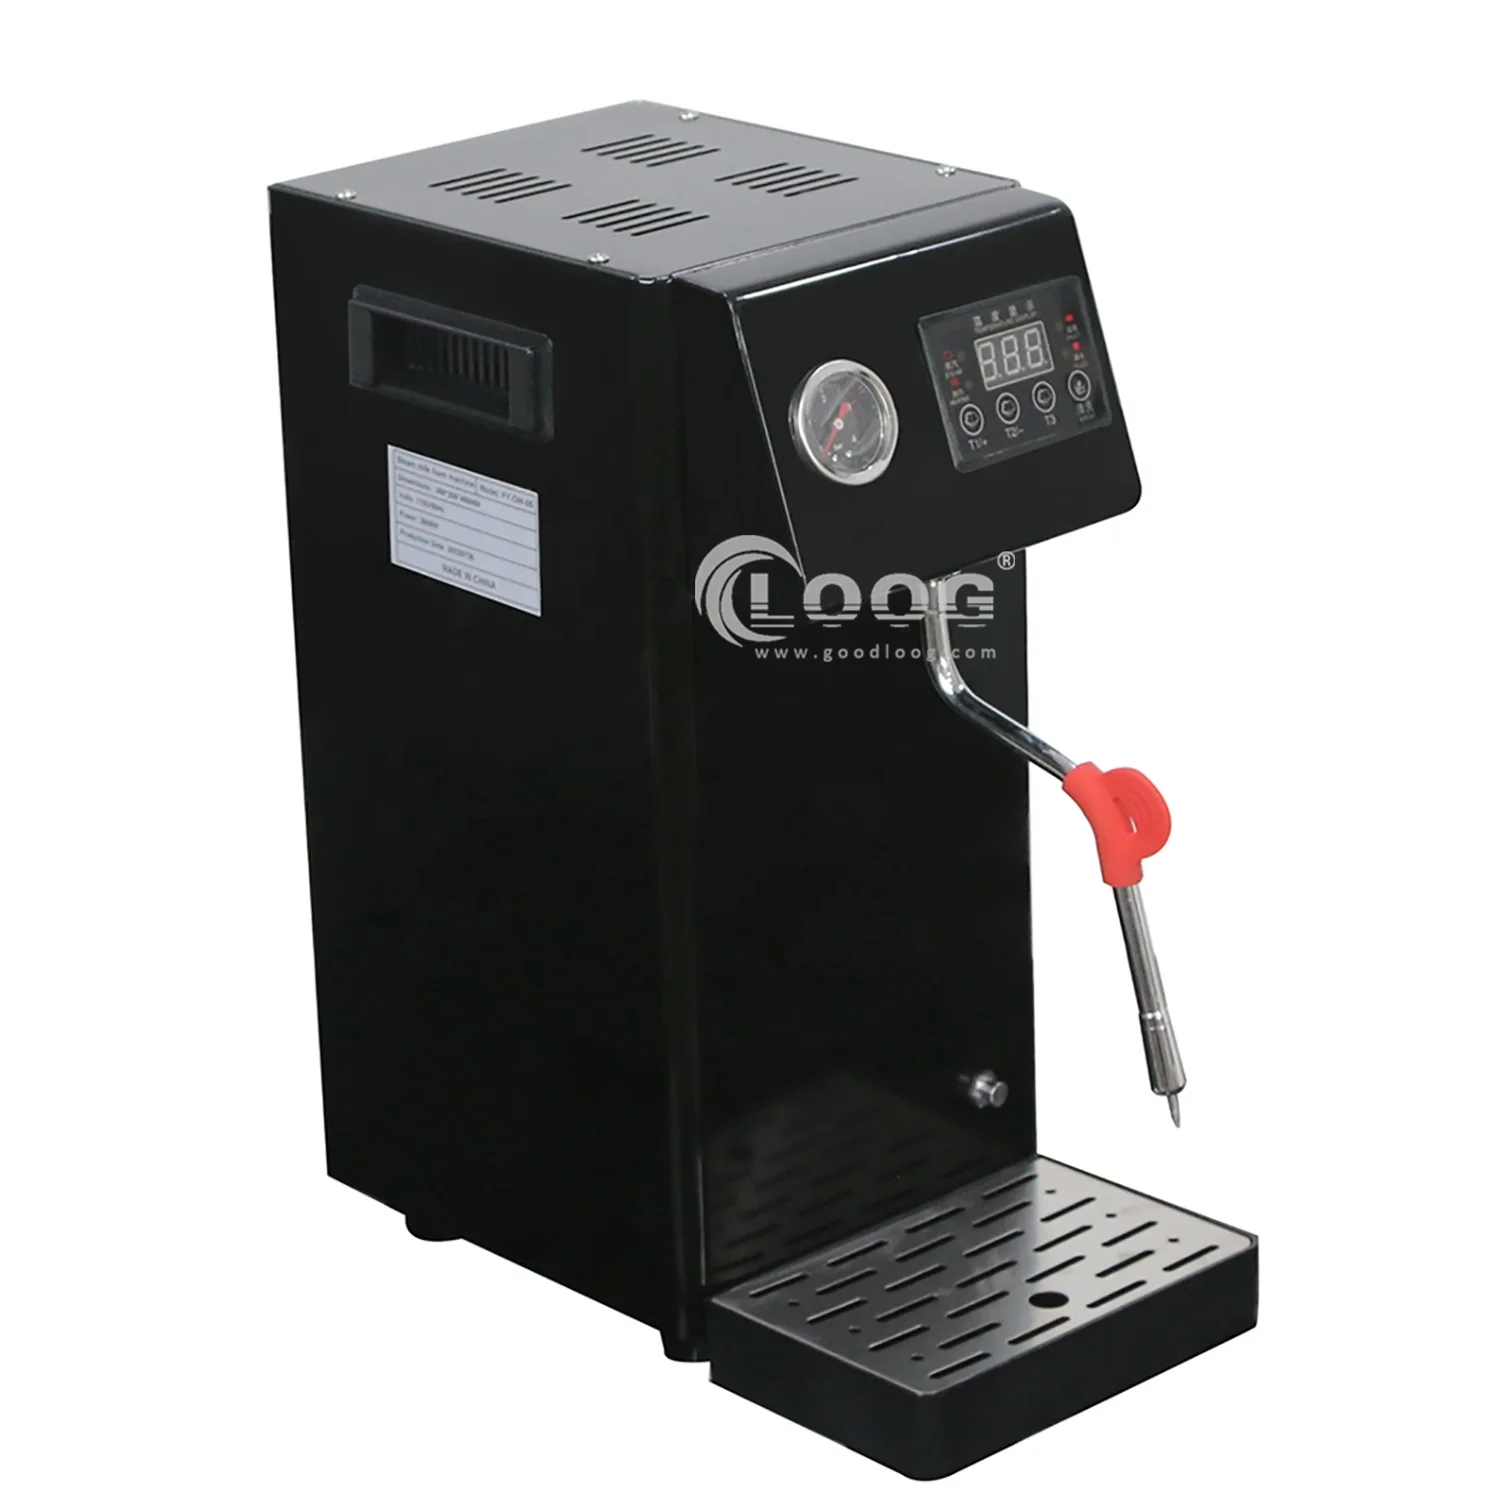 220V Electric Milk Heater For Coffee And Cold Coffee Heater With Foam Maker  Automatic And Efficient In Gold From Gearbestshop, $24.13